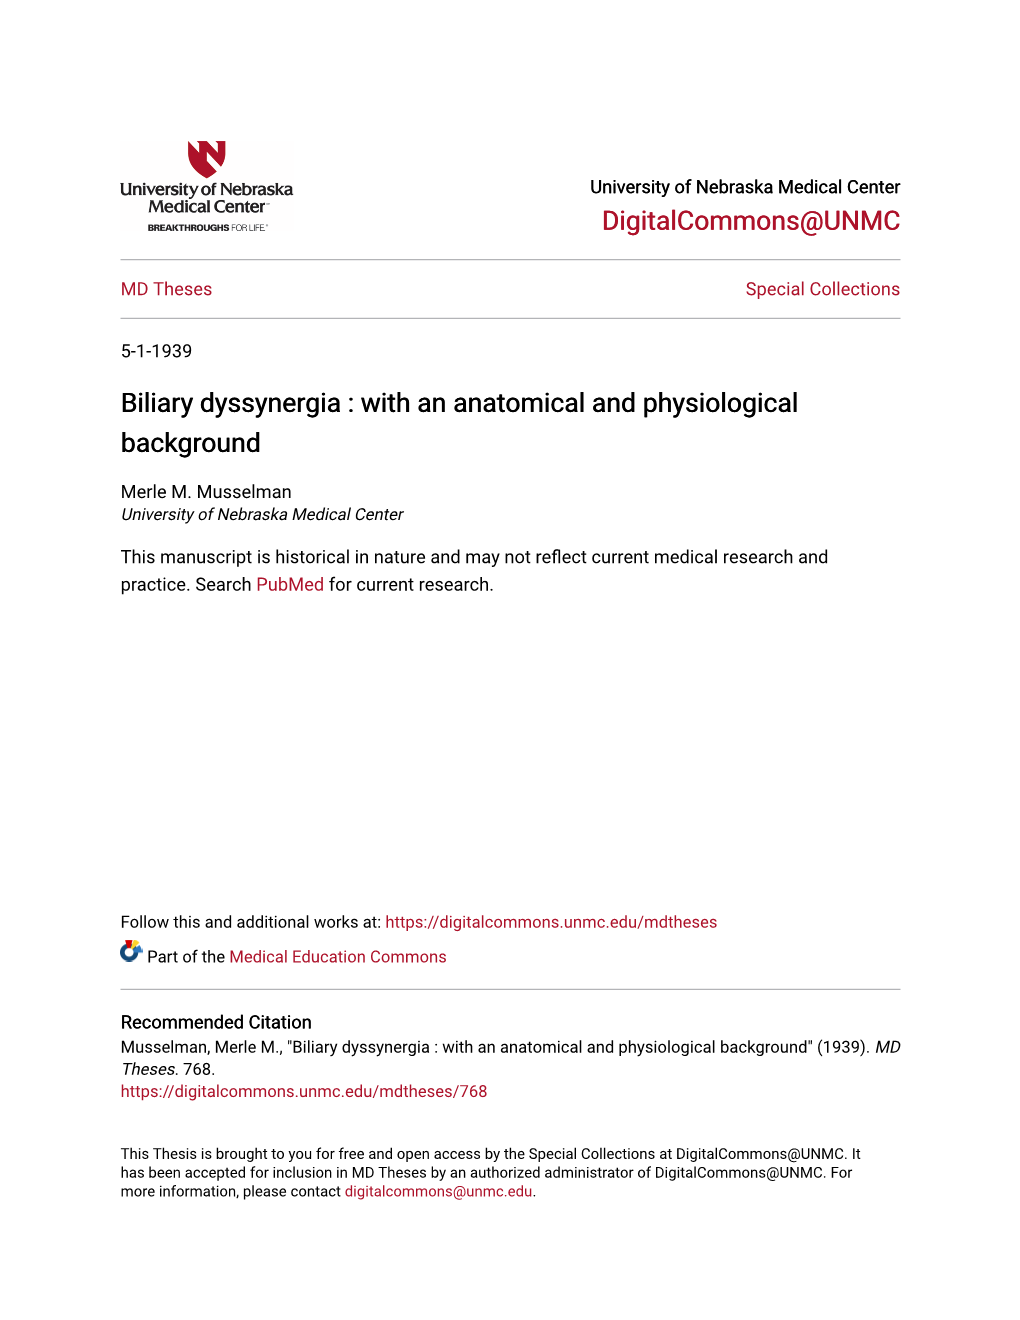 Biliary Dyssynergia : with an Anatomical and Physiological Background